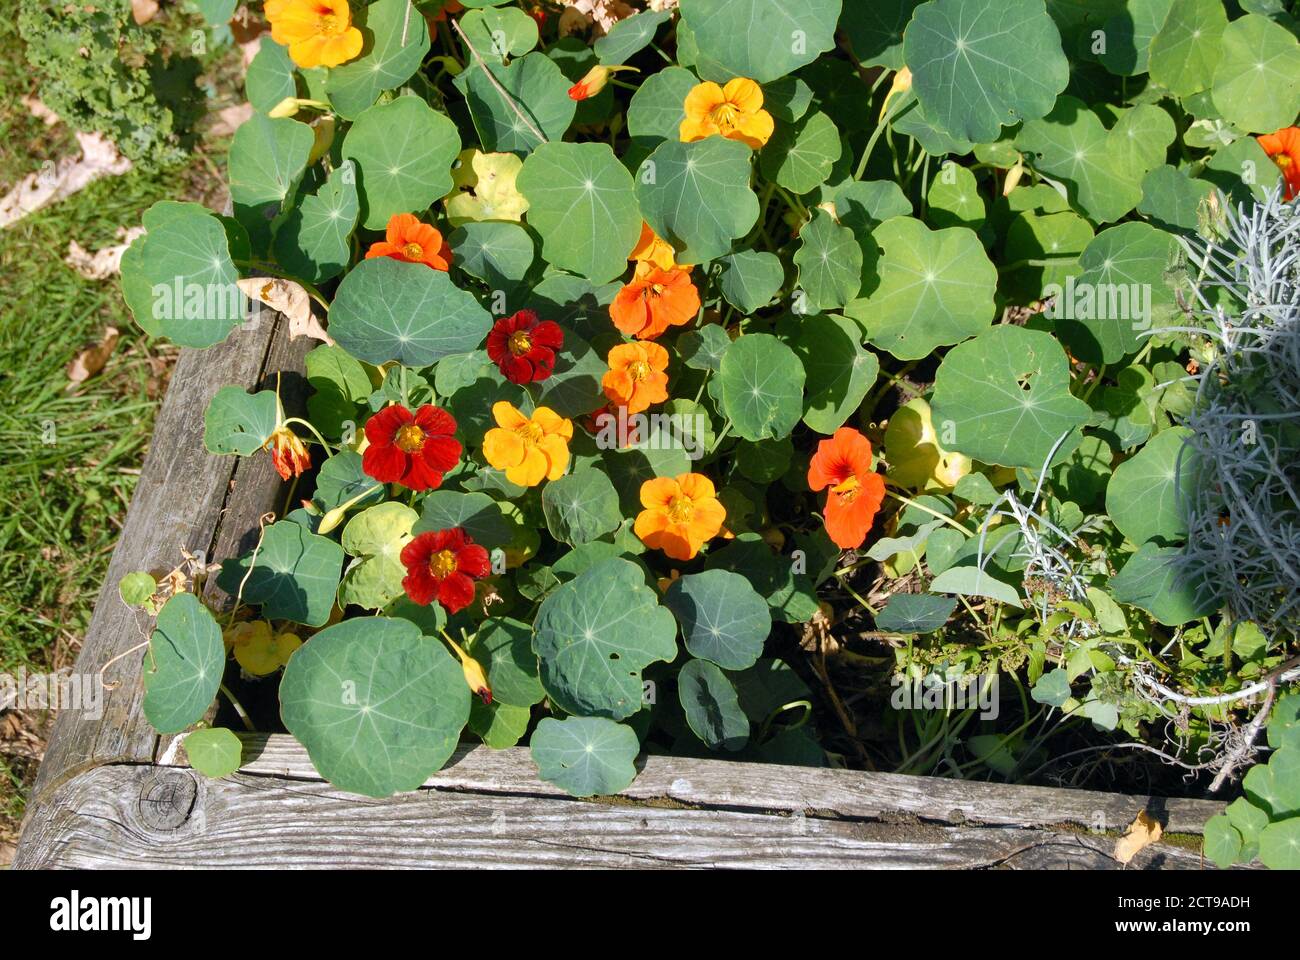 Colorful pansies in a flower bed Stock Photo